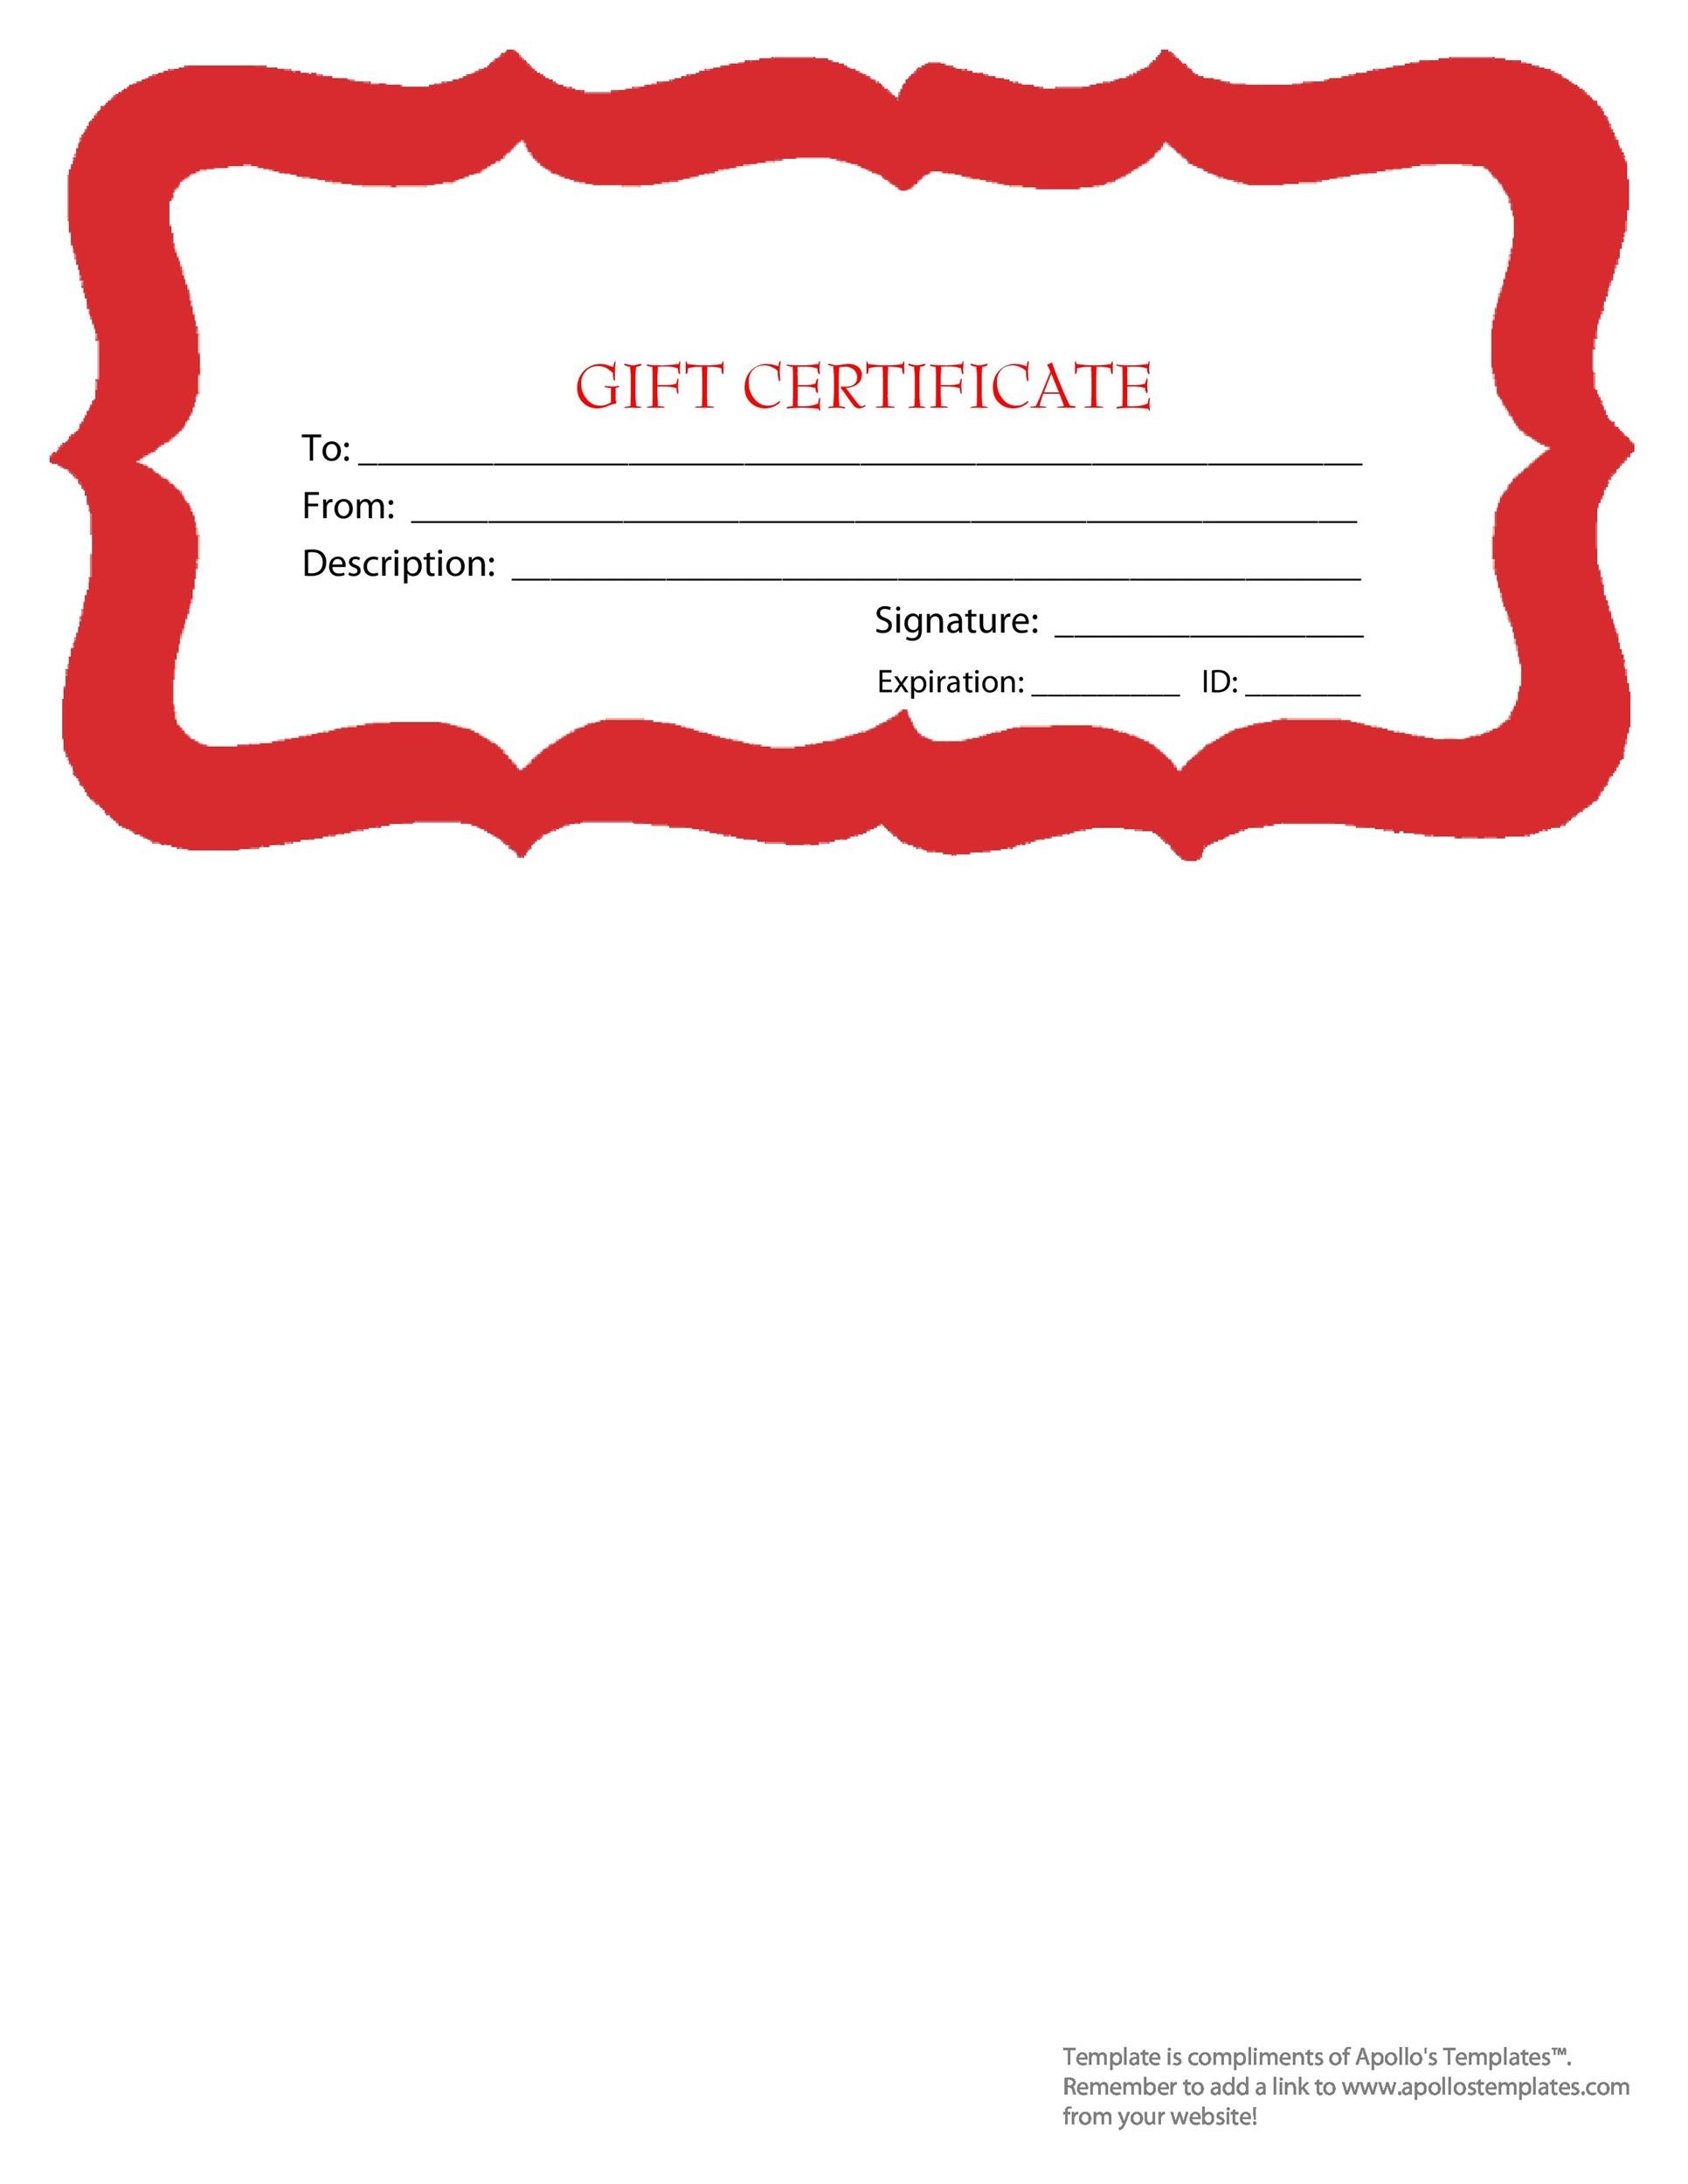 31 free gift certificate templates templatelab